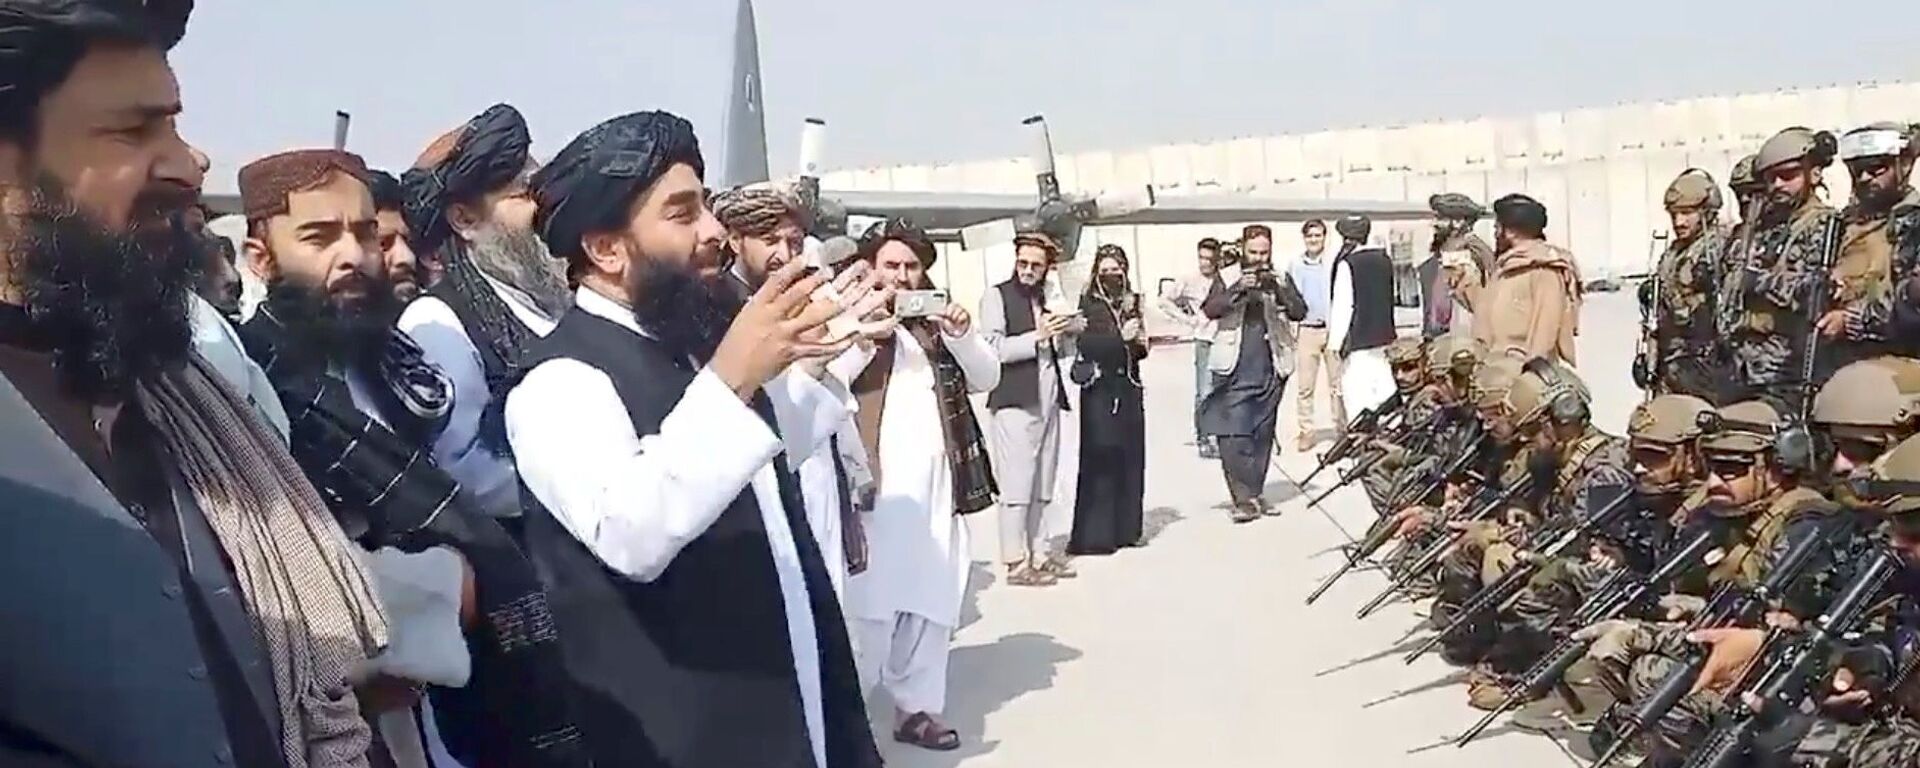 Taliban spokesman Zabihullah Mujahid speaks to Badri 313 military unit at Kabul's airport, Afghanistan August 31, 2021 in this still image obtained from a handout video.  Taliban/Handout via REUTERS   ATTENTION EDITORS - THIS IMAGE HAS BEEN SUPPLIED BY A THIRD PARTY. NO RESALES. NO ARCHIVES.  - Sputnik International, 1920